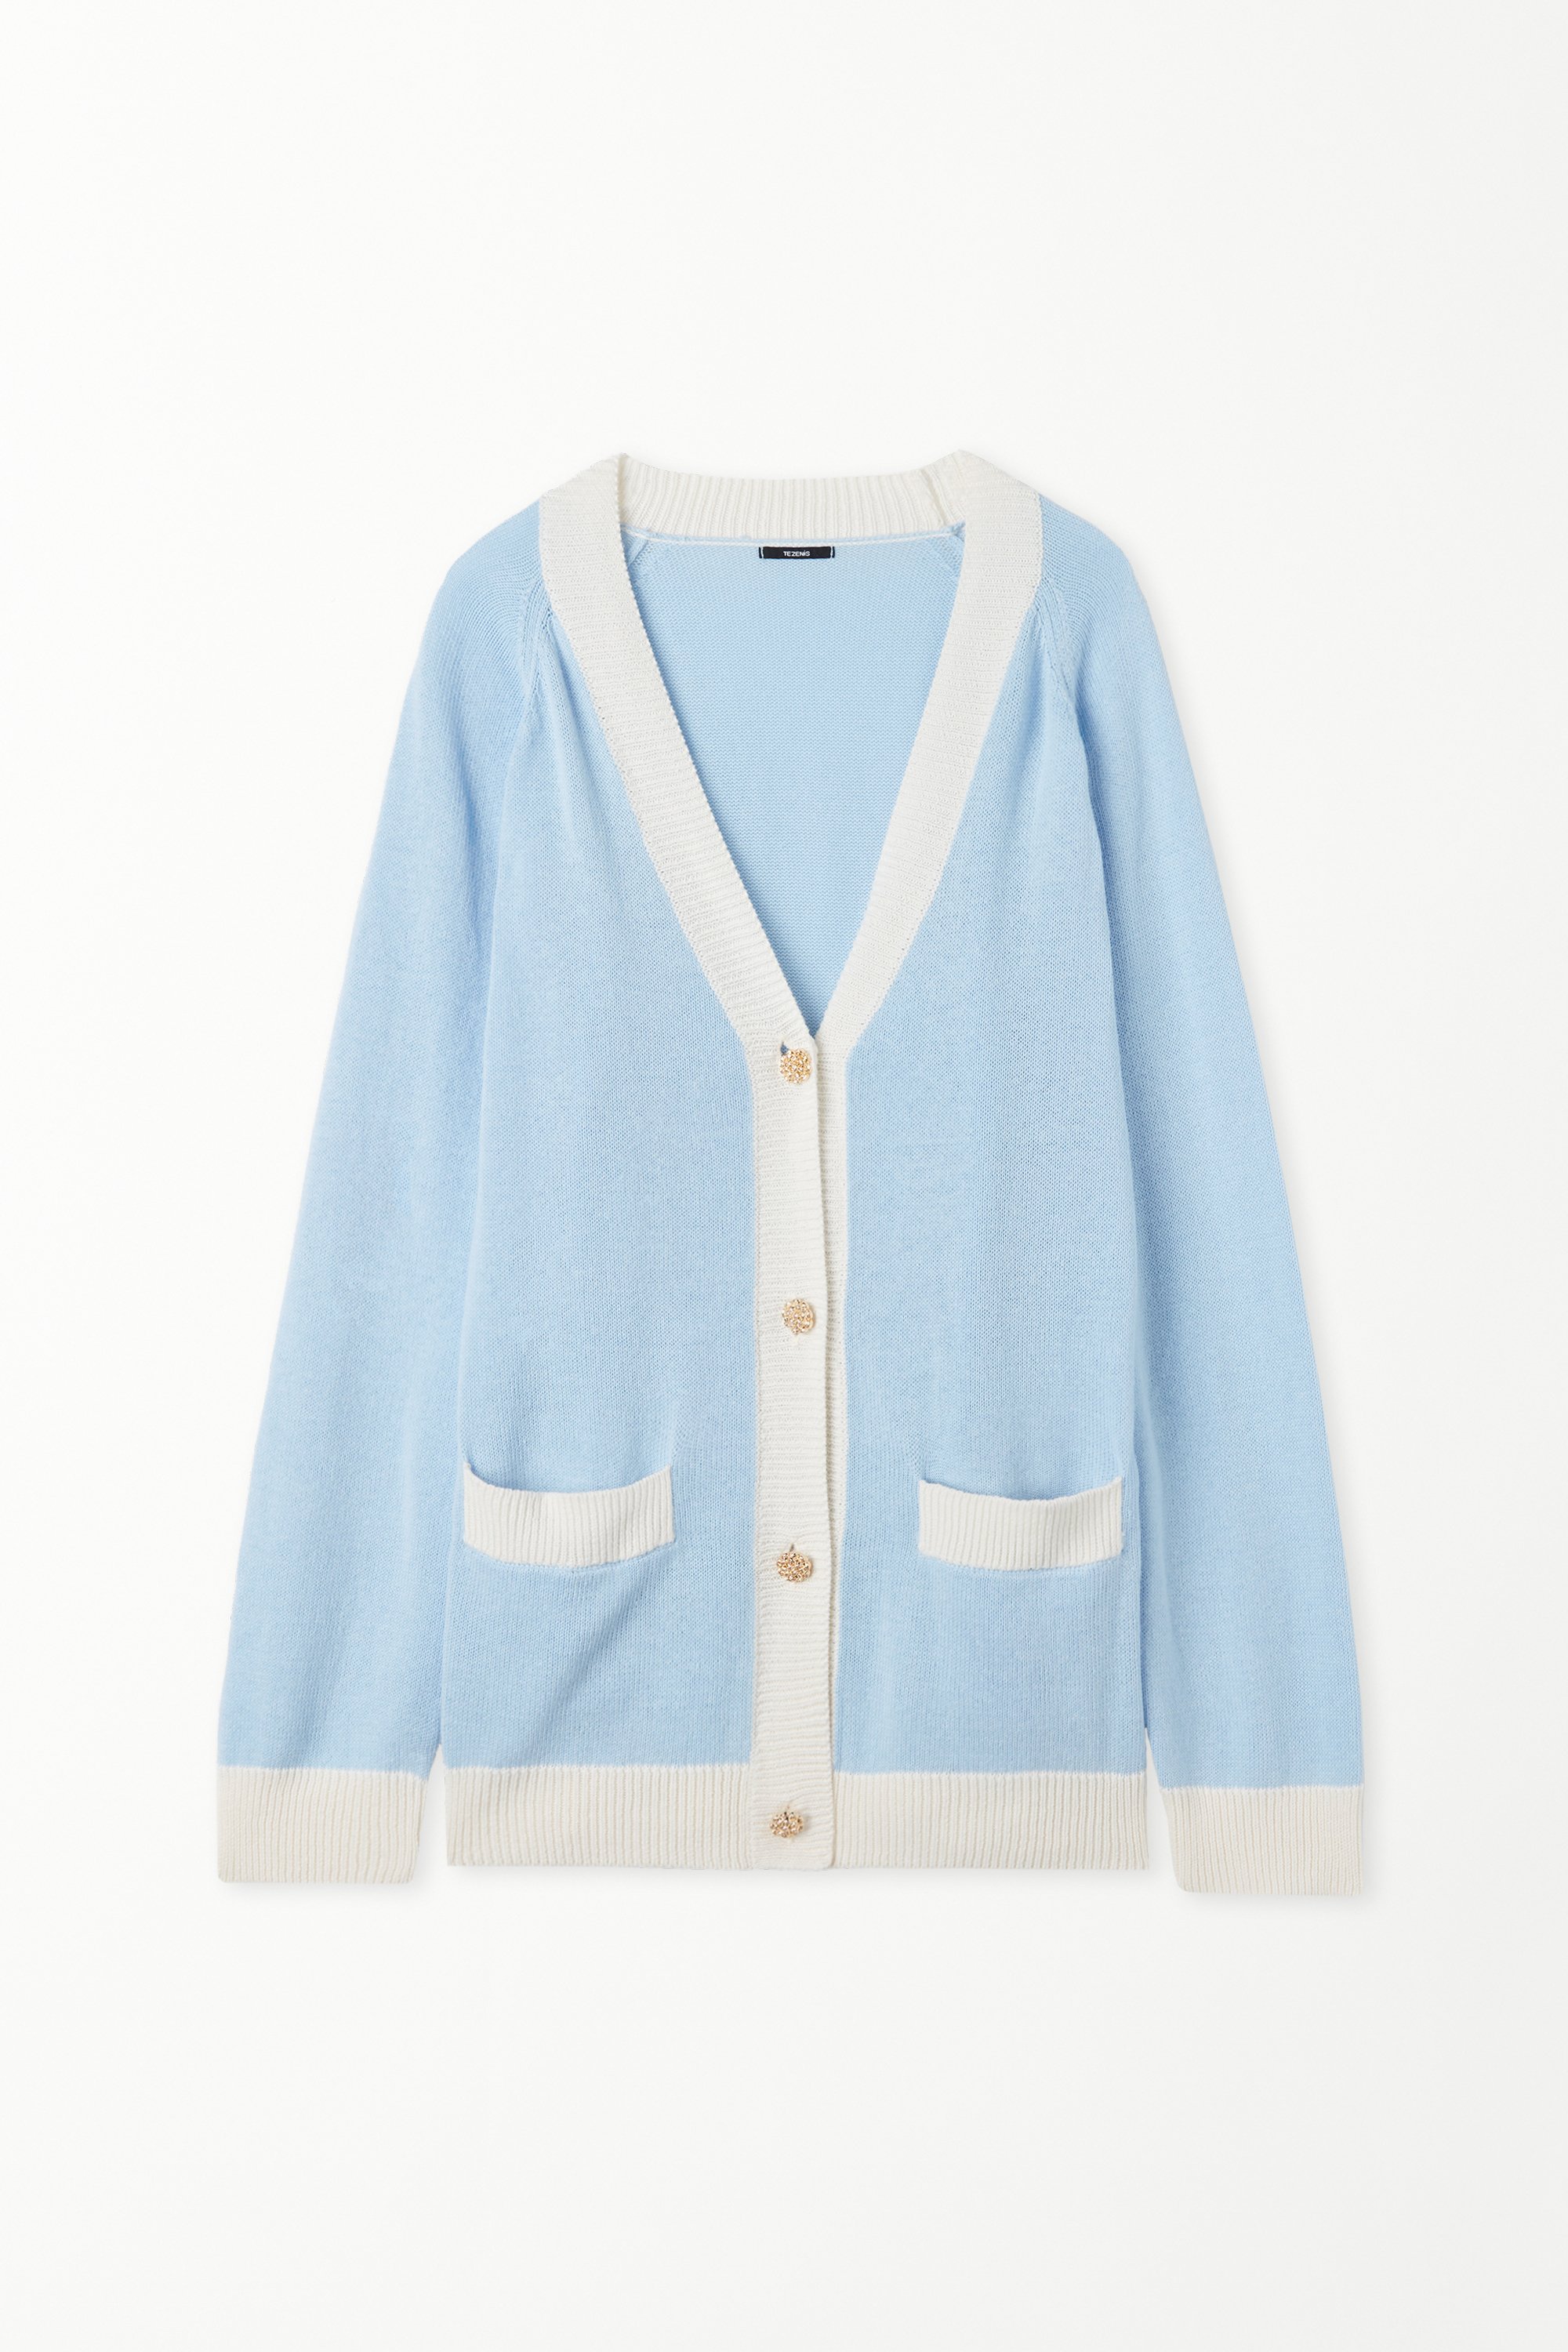 Long-Sleeved Fully-Fashioned Cardigan with Buttons